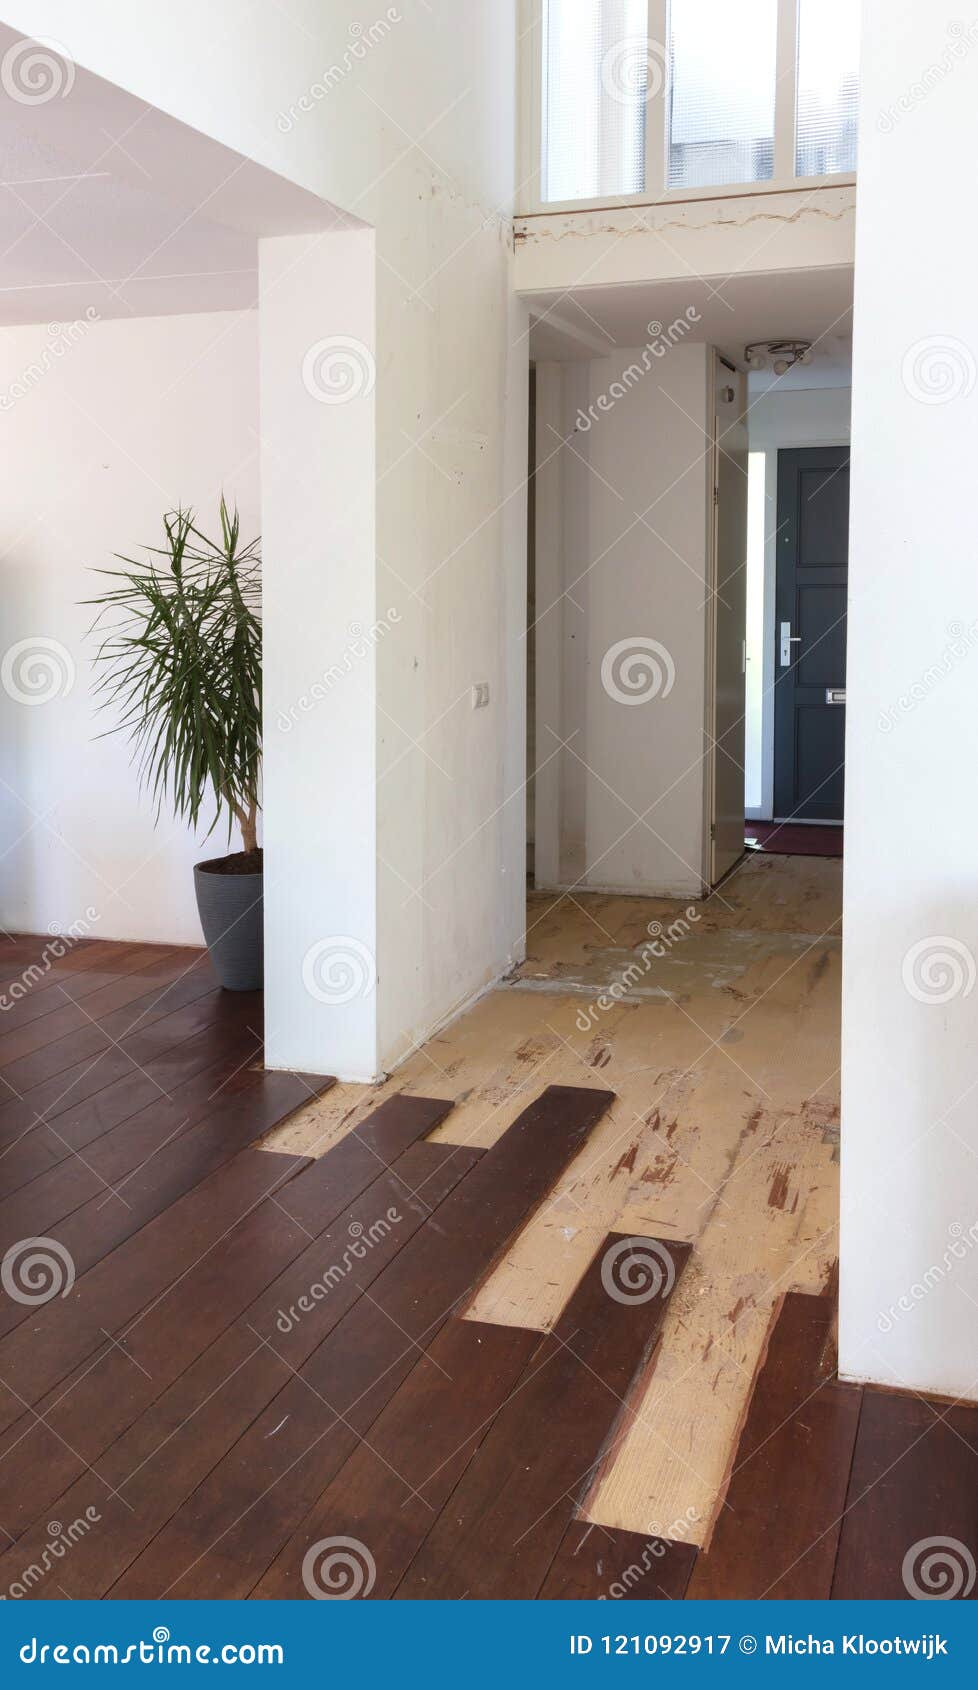 Breaking Up A Solid Wooden Floor Stock Image Image Of House